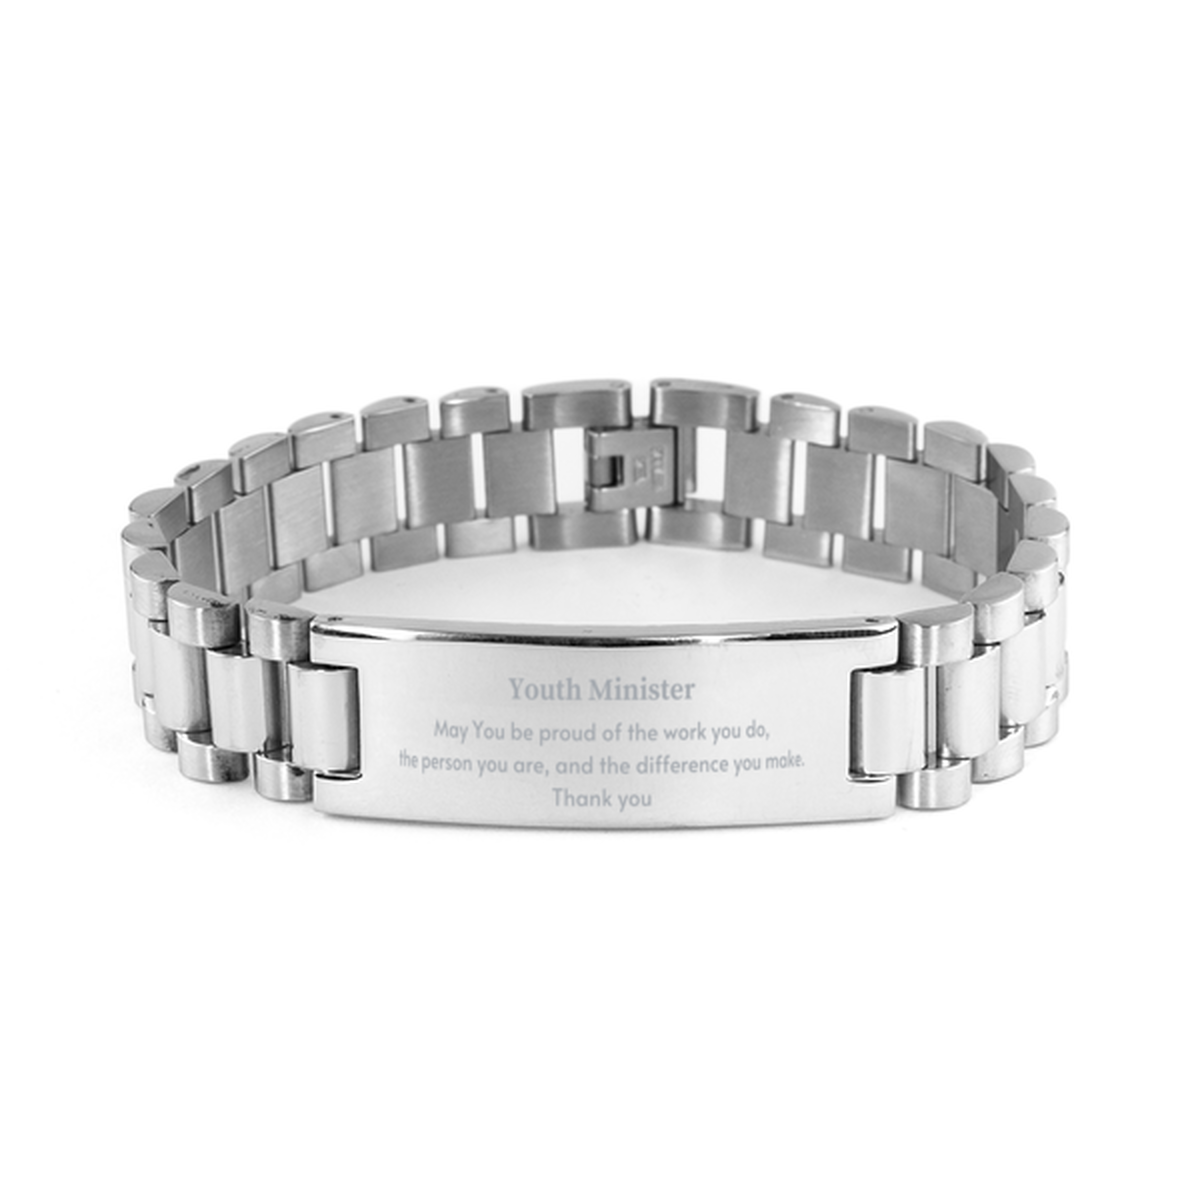 Heartwarming Ladder Stainless Steel Bracelet Retirement Coworkers Gifts for Youth Minister, Youth Minister May You be proud of the work you do, the person you are Gifts for Boss Men Women Friends